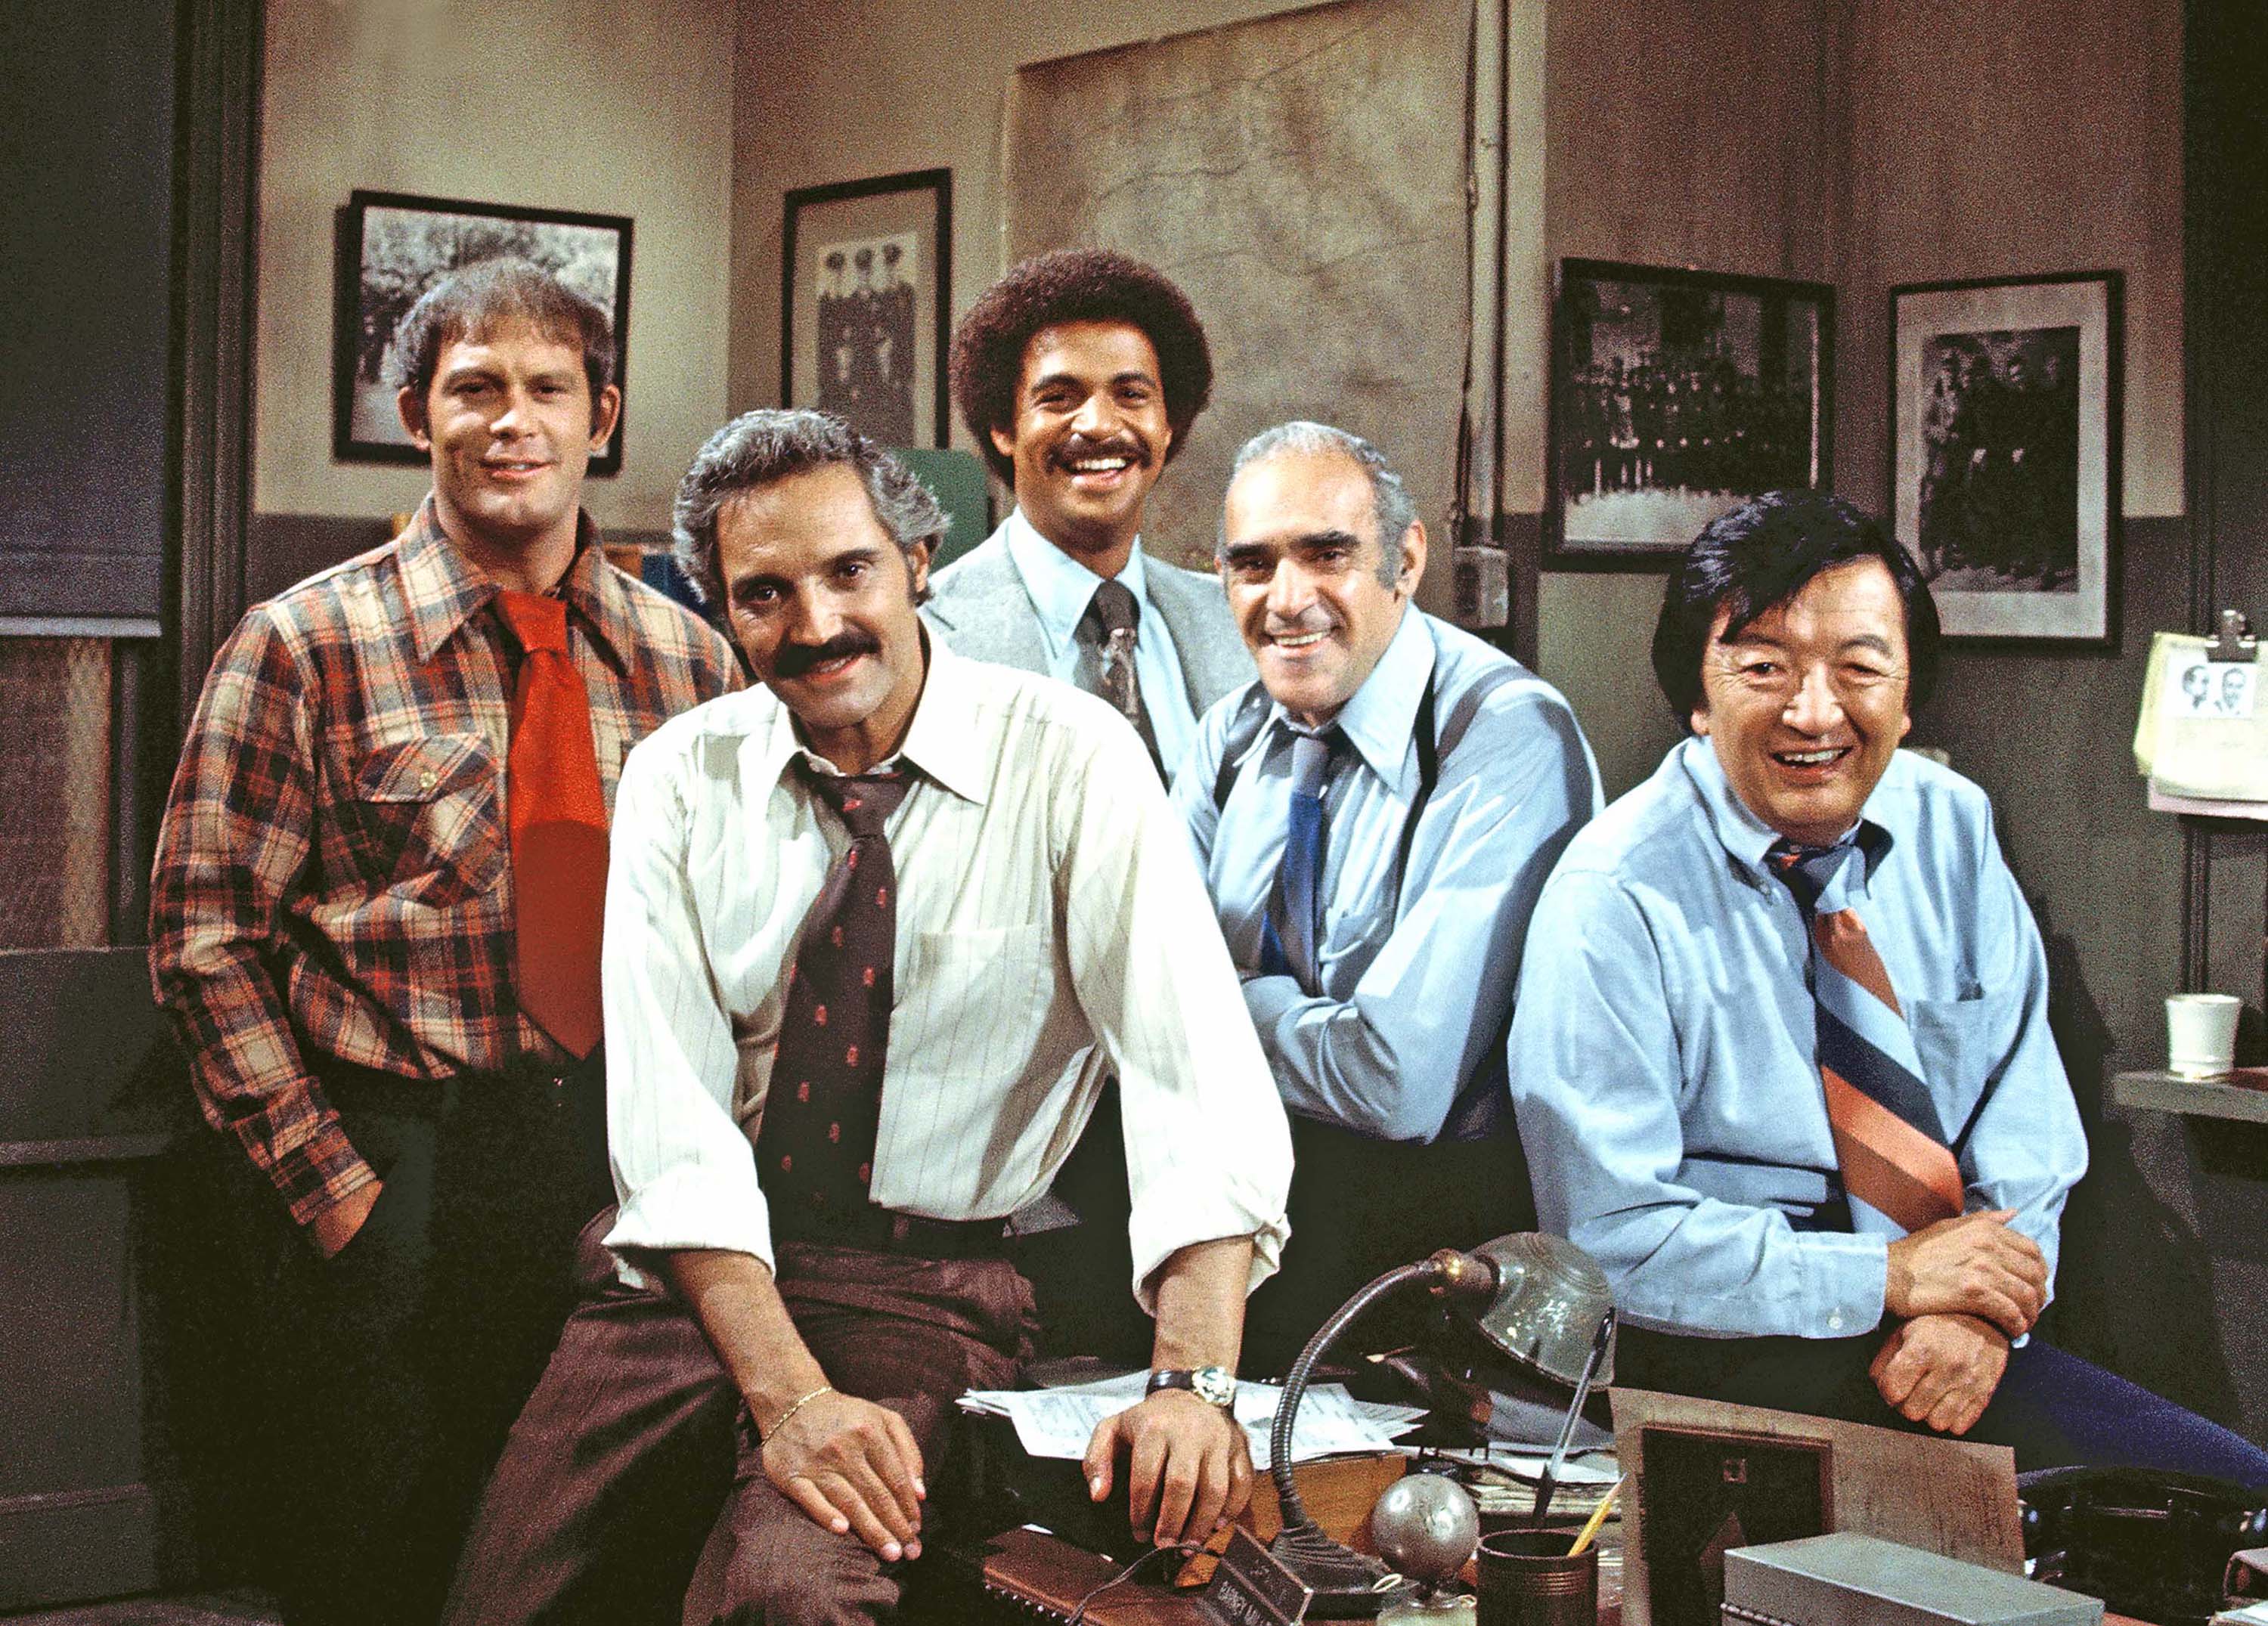 Max Gail as Detective Stanley Wojciehowicz, Hal Linden (Barney), Ron Glass (Harris) and Jack Soo (Yemana) in "Barney Miller" on September 23, 1976 | Source: Getty Images